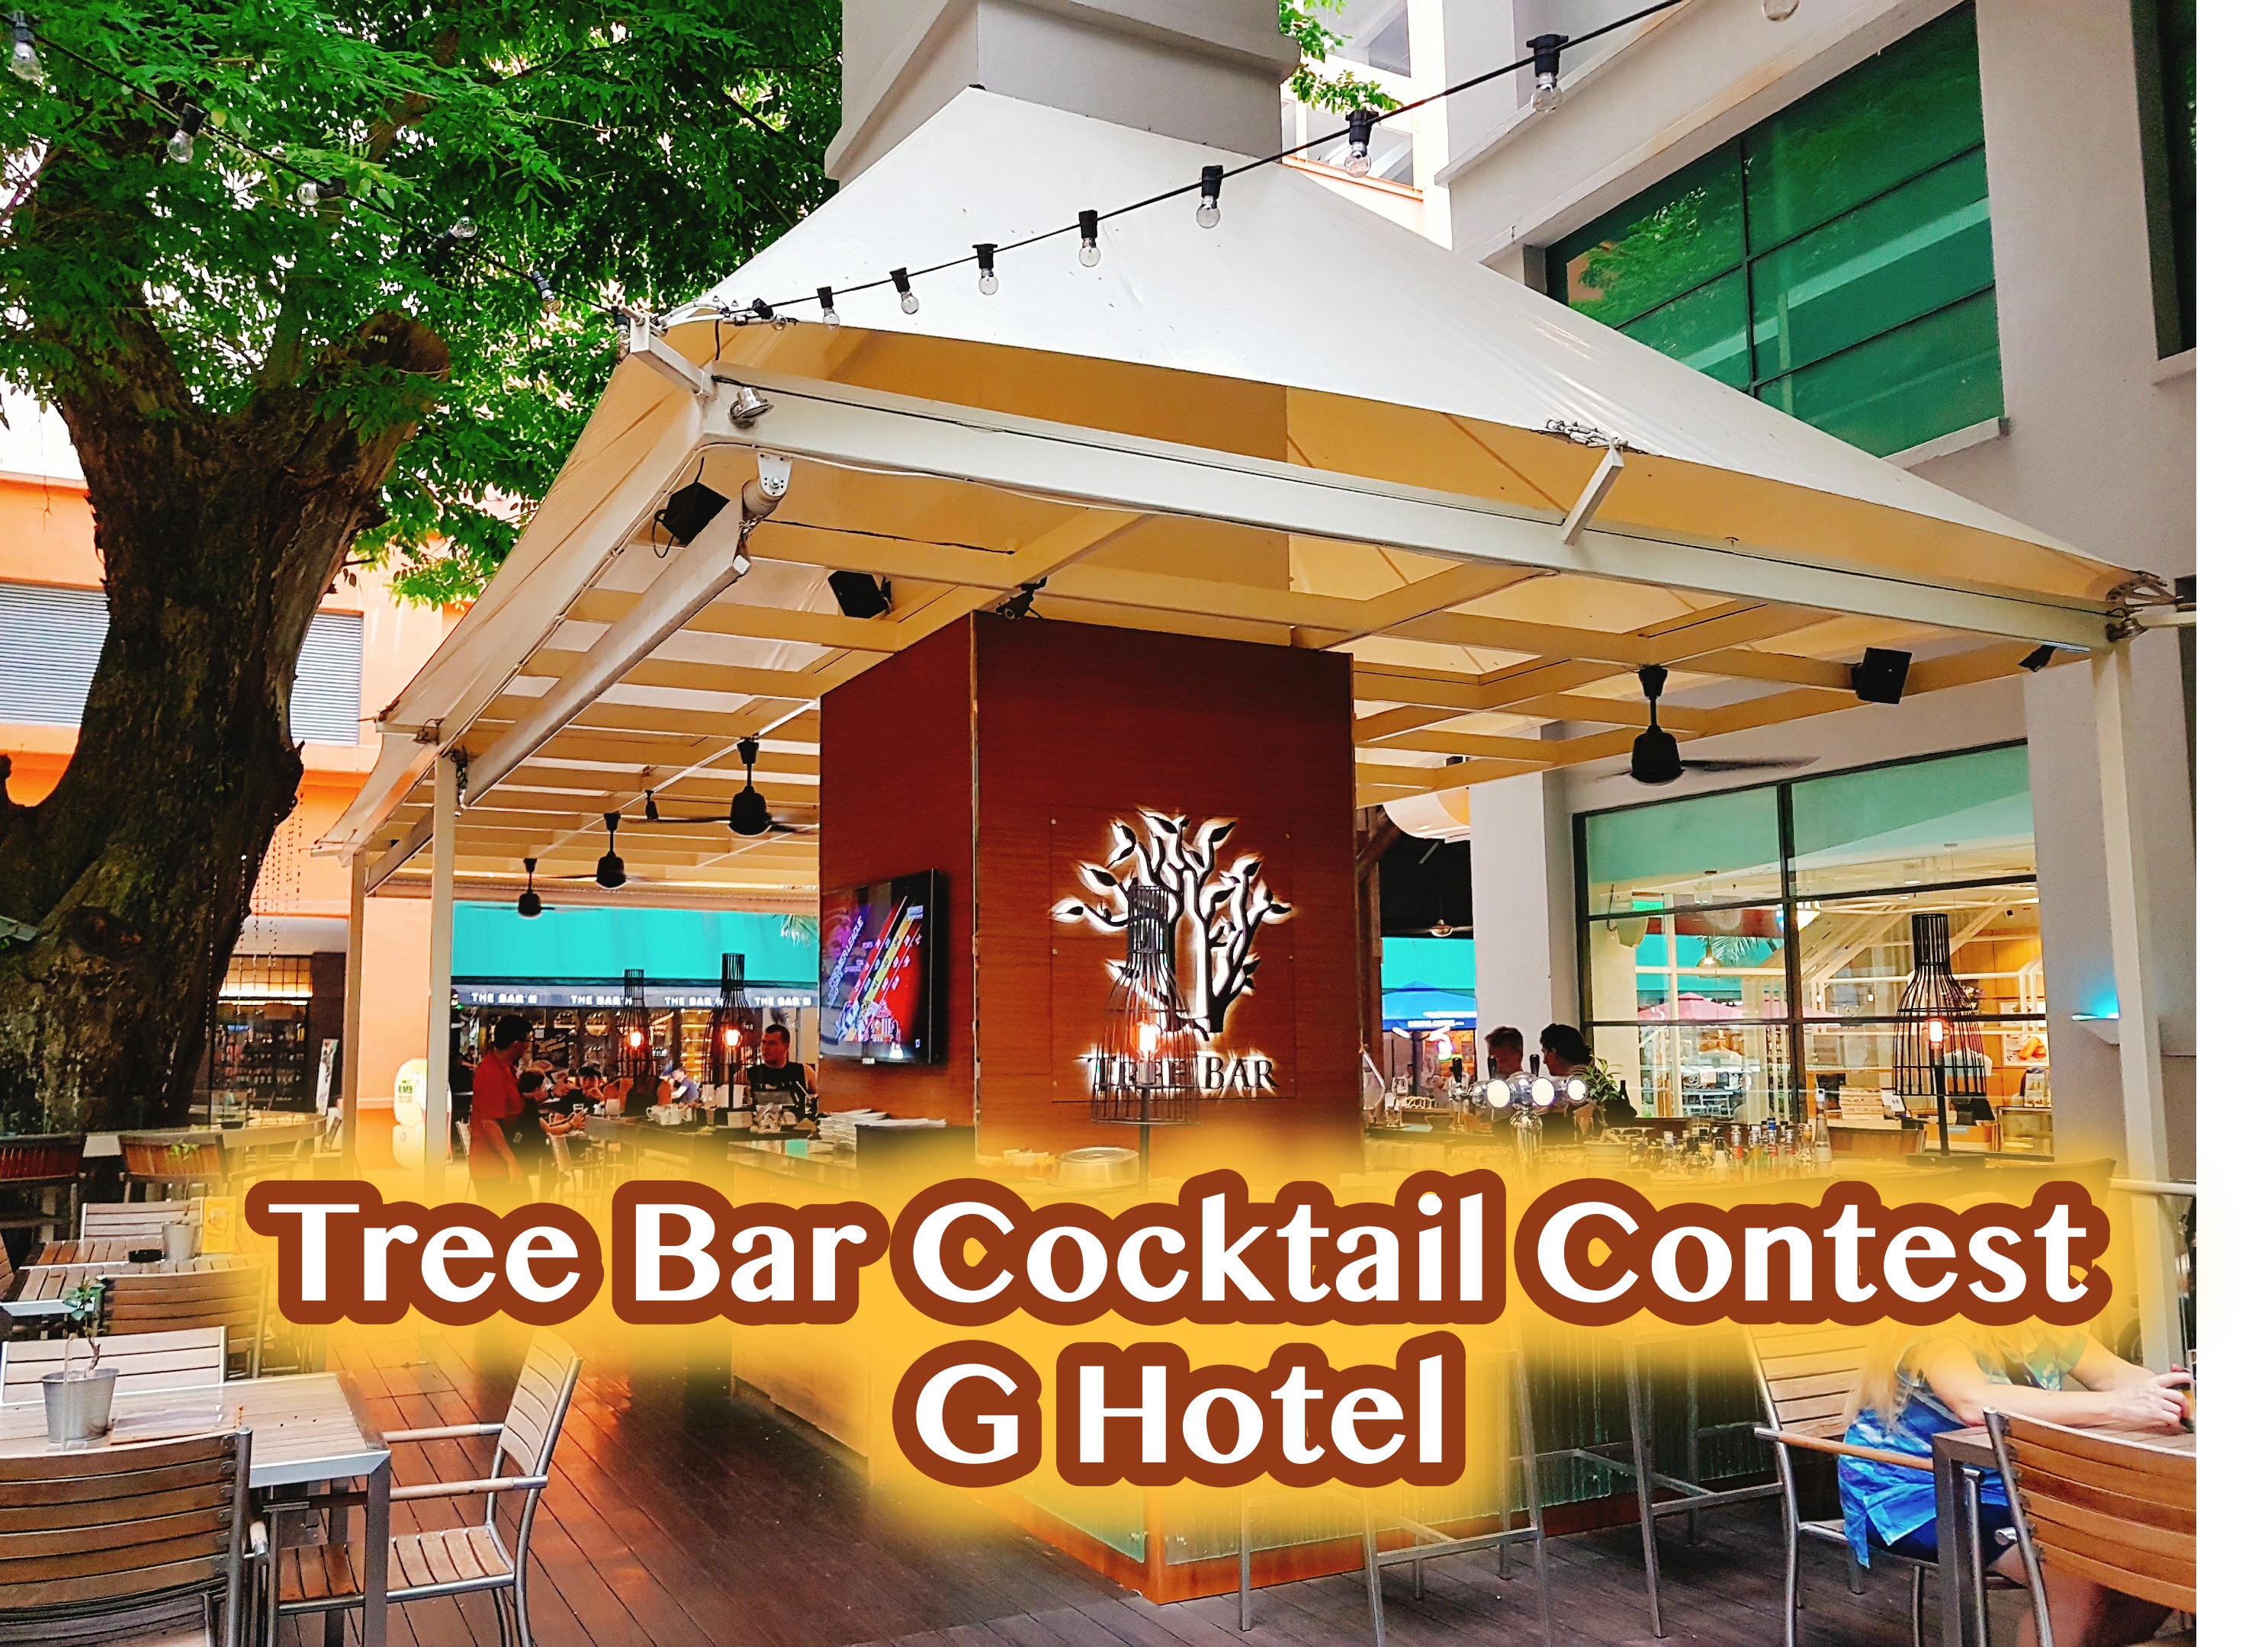 G Hotel ~ Tree Bar ~ Cocktail Making Contest